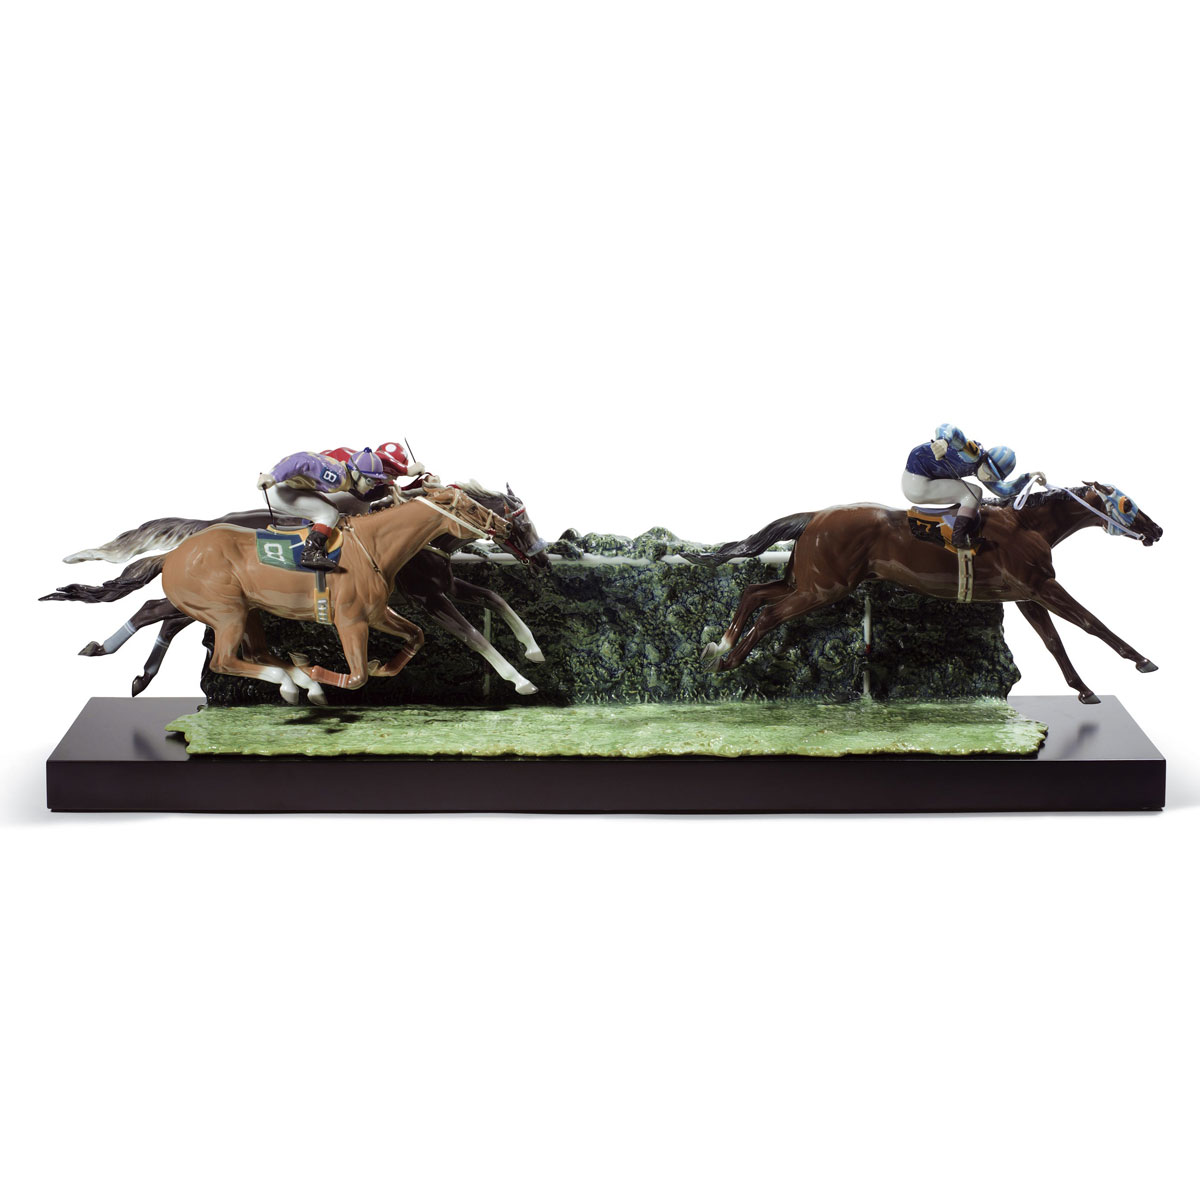 Lladro Classic Sculpture, At The Derby Horses Sculpture. Limited Edition